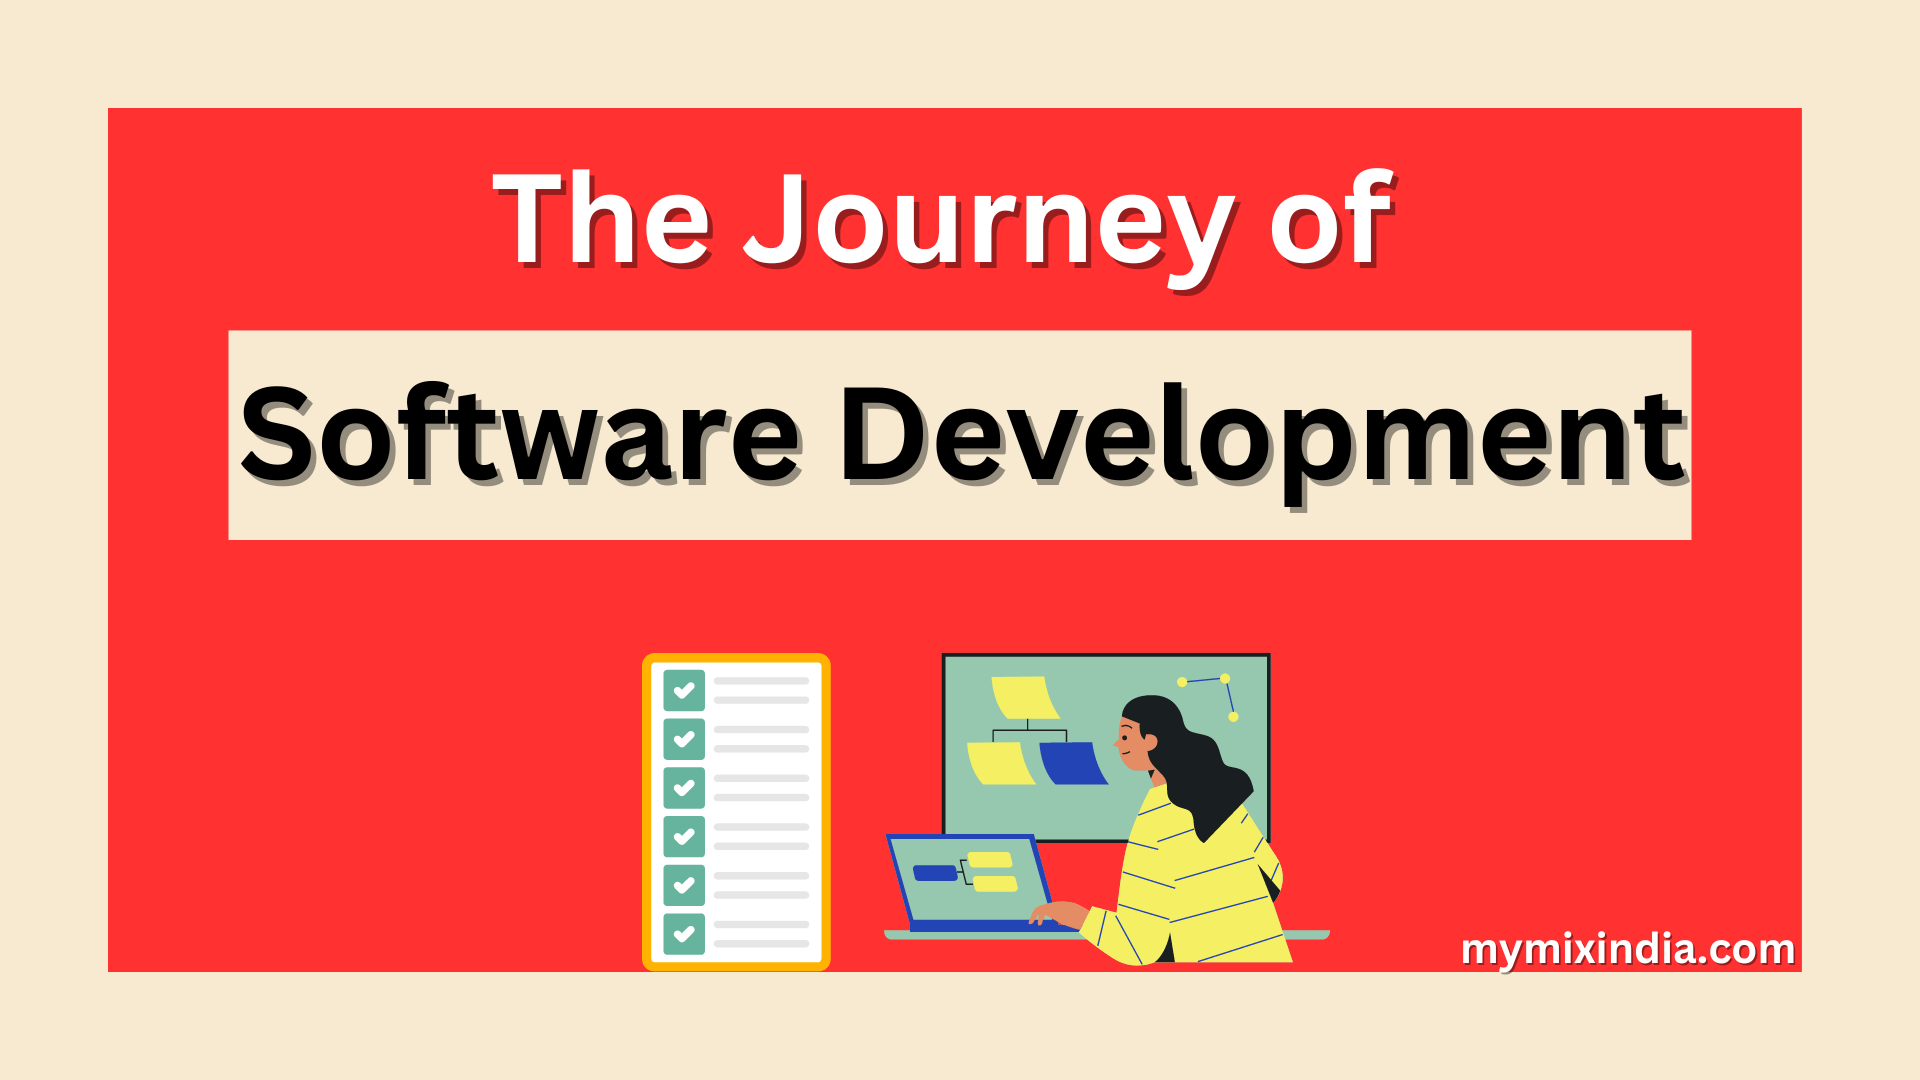 The-Journey-of-Software-Development-From-Idea-to-Implementation-mymixindia.com